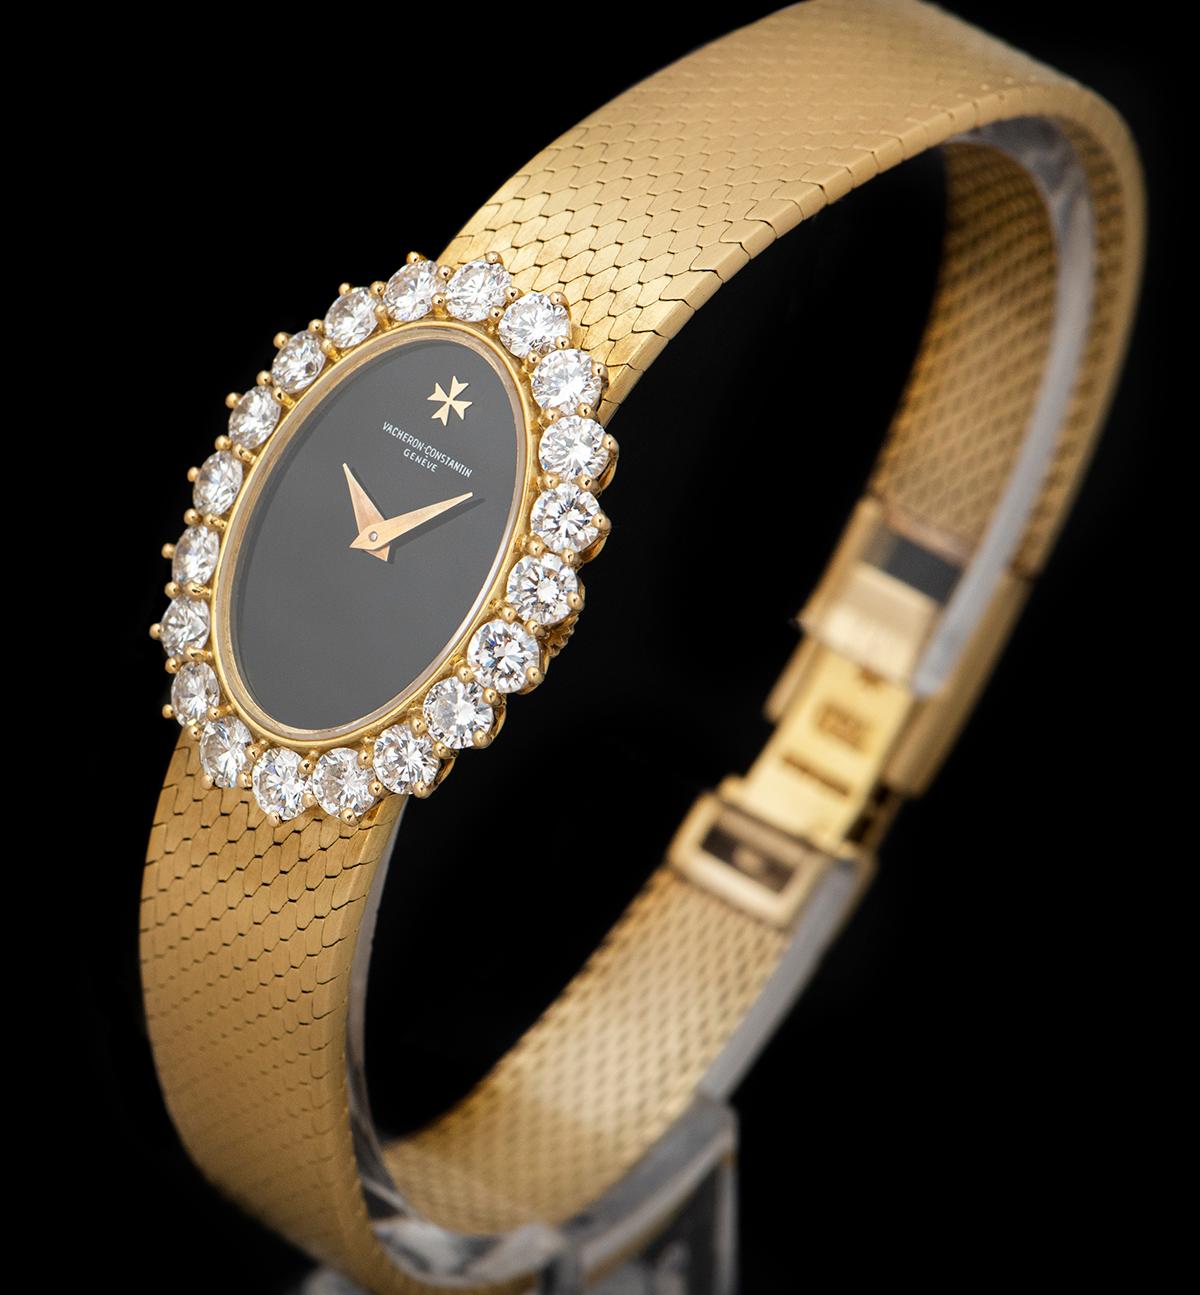 An 18k Yellow Gold Ladies Dress Wristwatch, black onyx dial, a fixed 18k yellow gold bezel set with 20 round brilliant cut diamonds (~2.06ct), an 18k yellow gold integrated bracelet with an 18k yellow gold jewellery style clasp, sapphire glass,